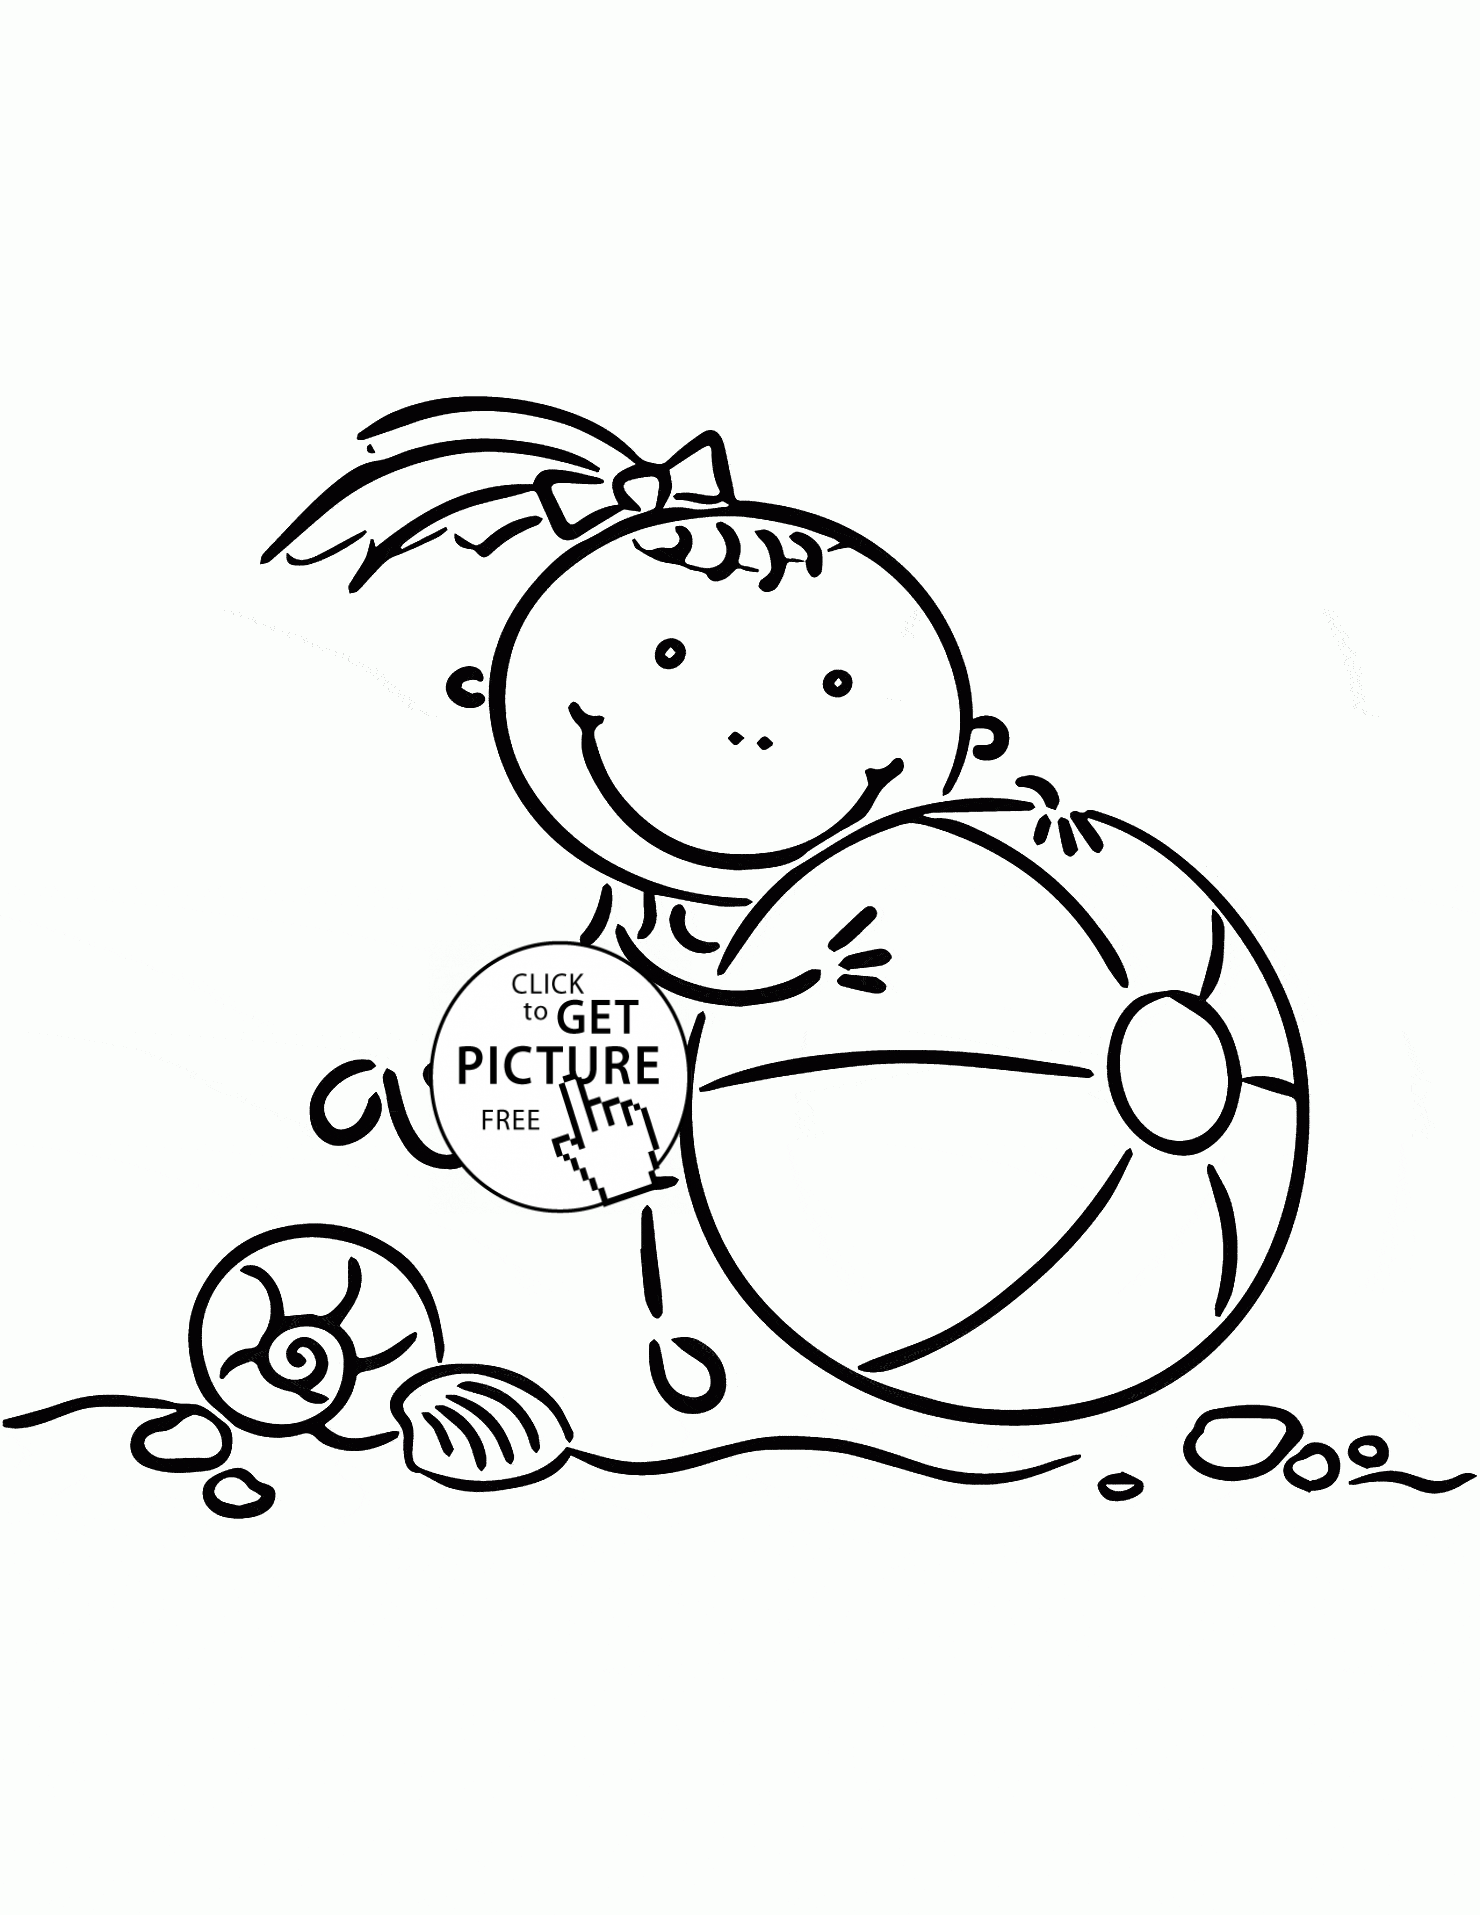 Coloring Pages For The Beach With A Girl On It   Coloring Home